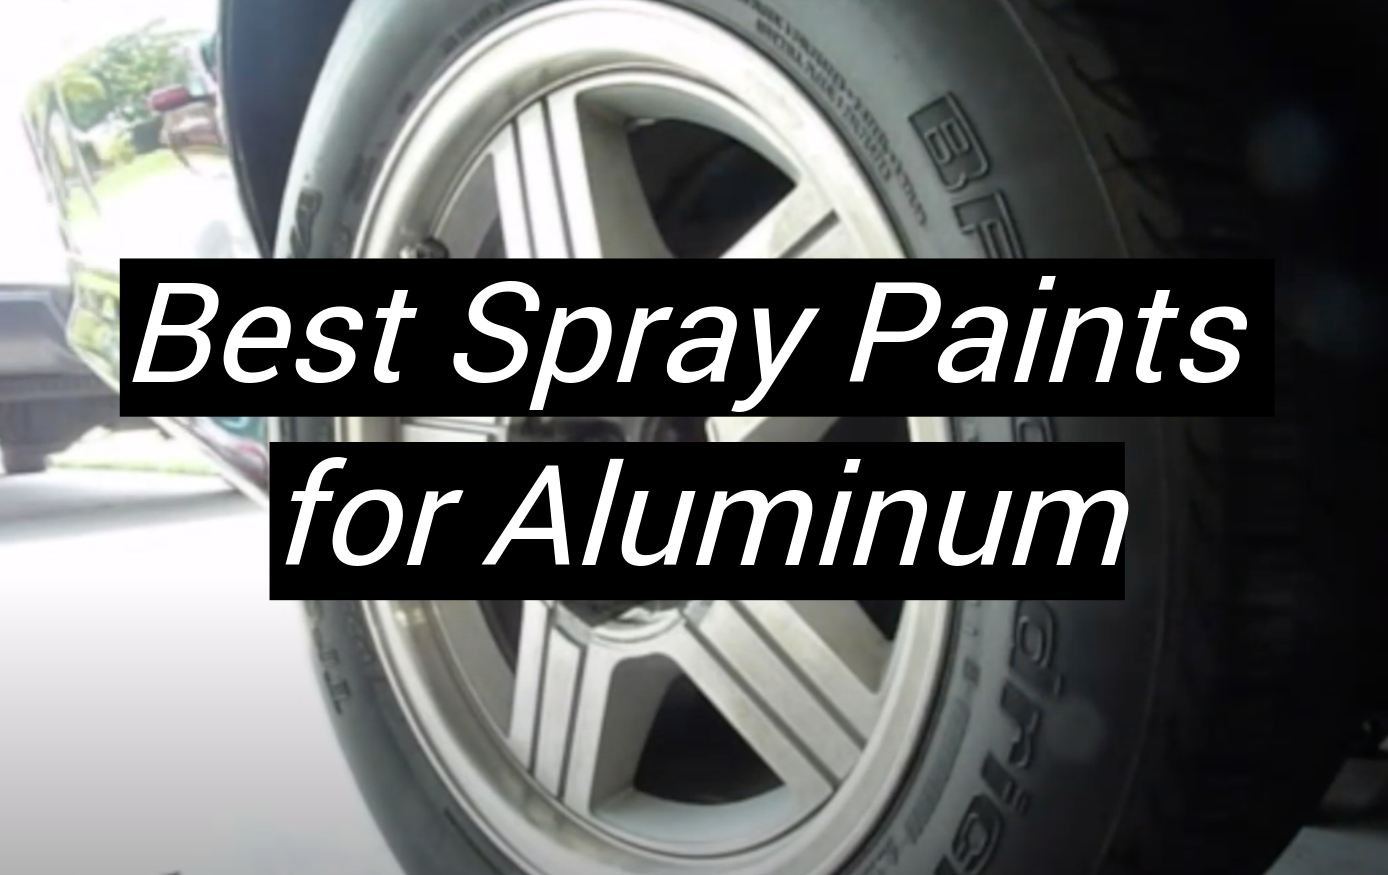 Top 5 Best Spray Paints for Aluminum [2020 Review] - MetalProfy